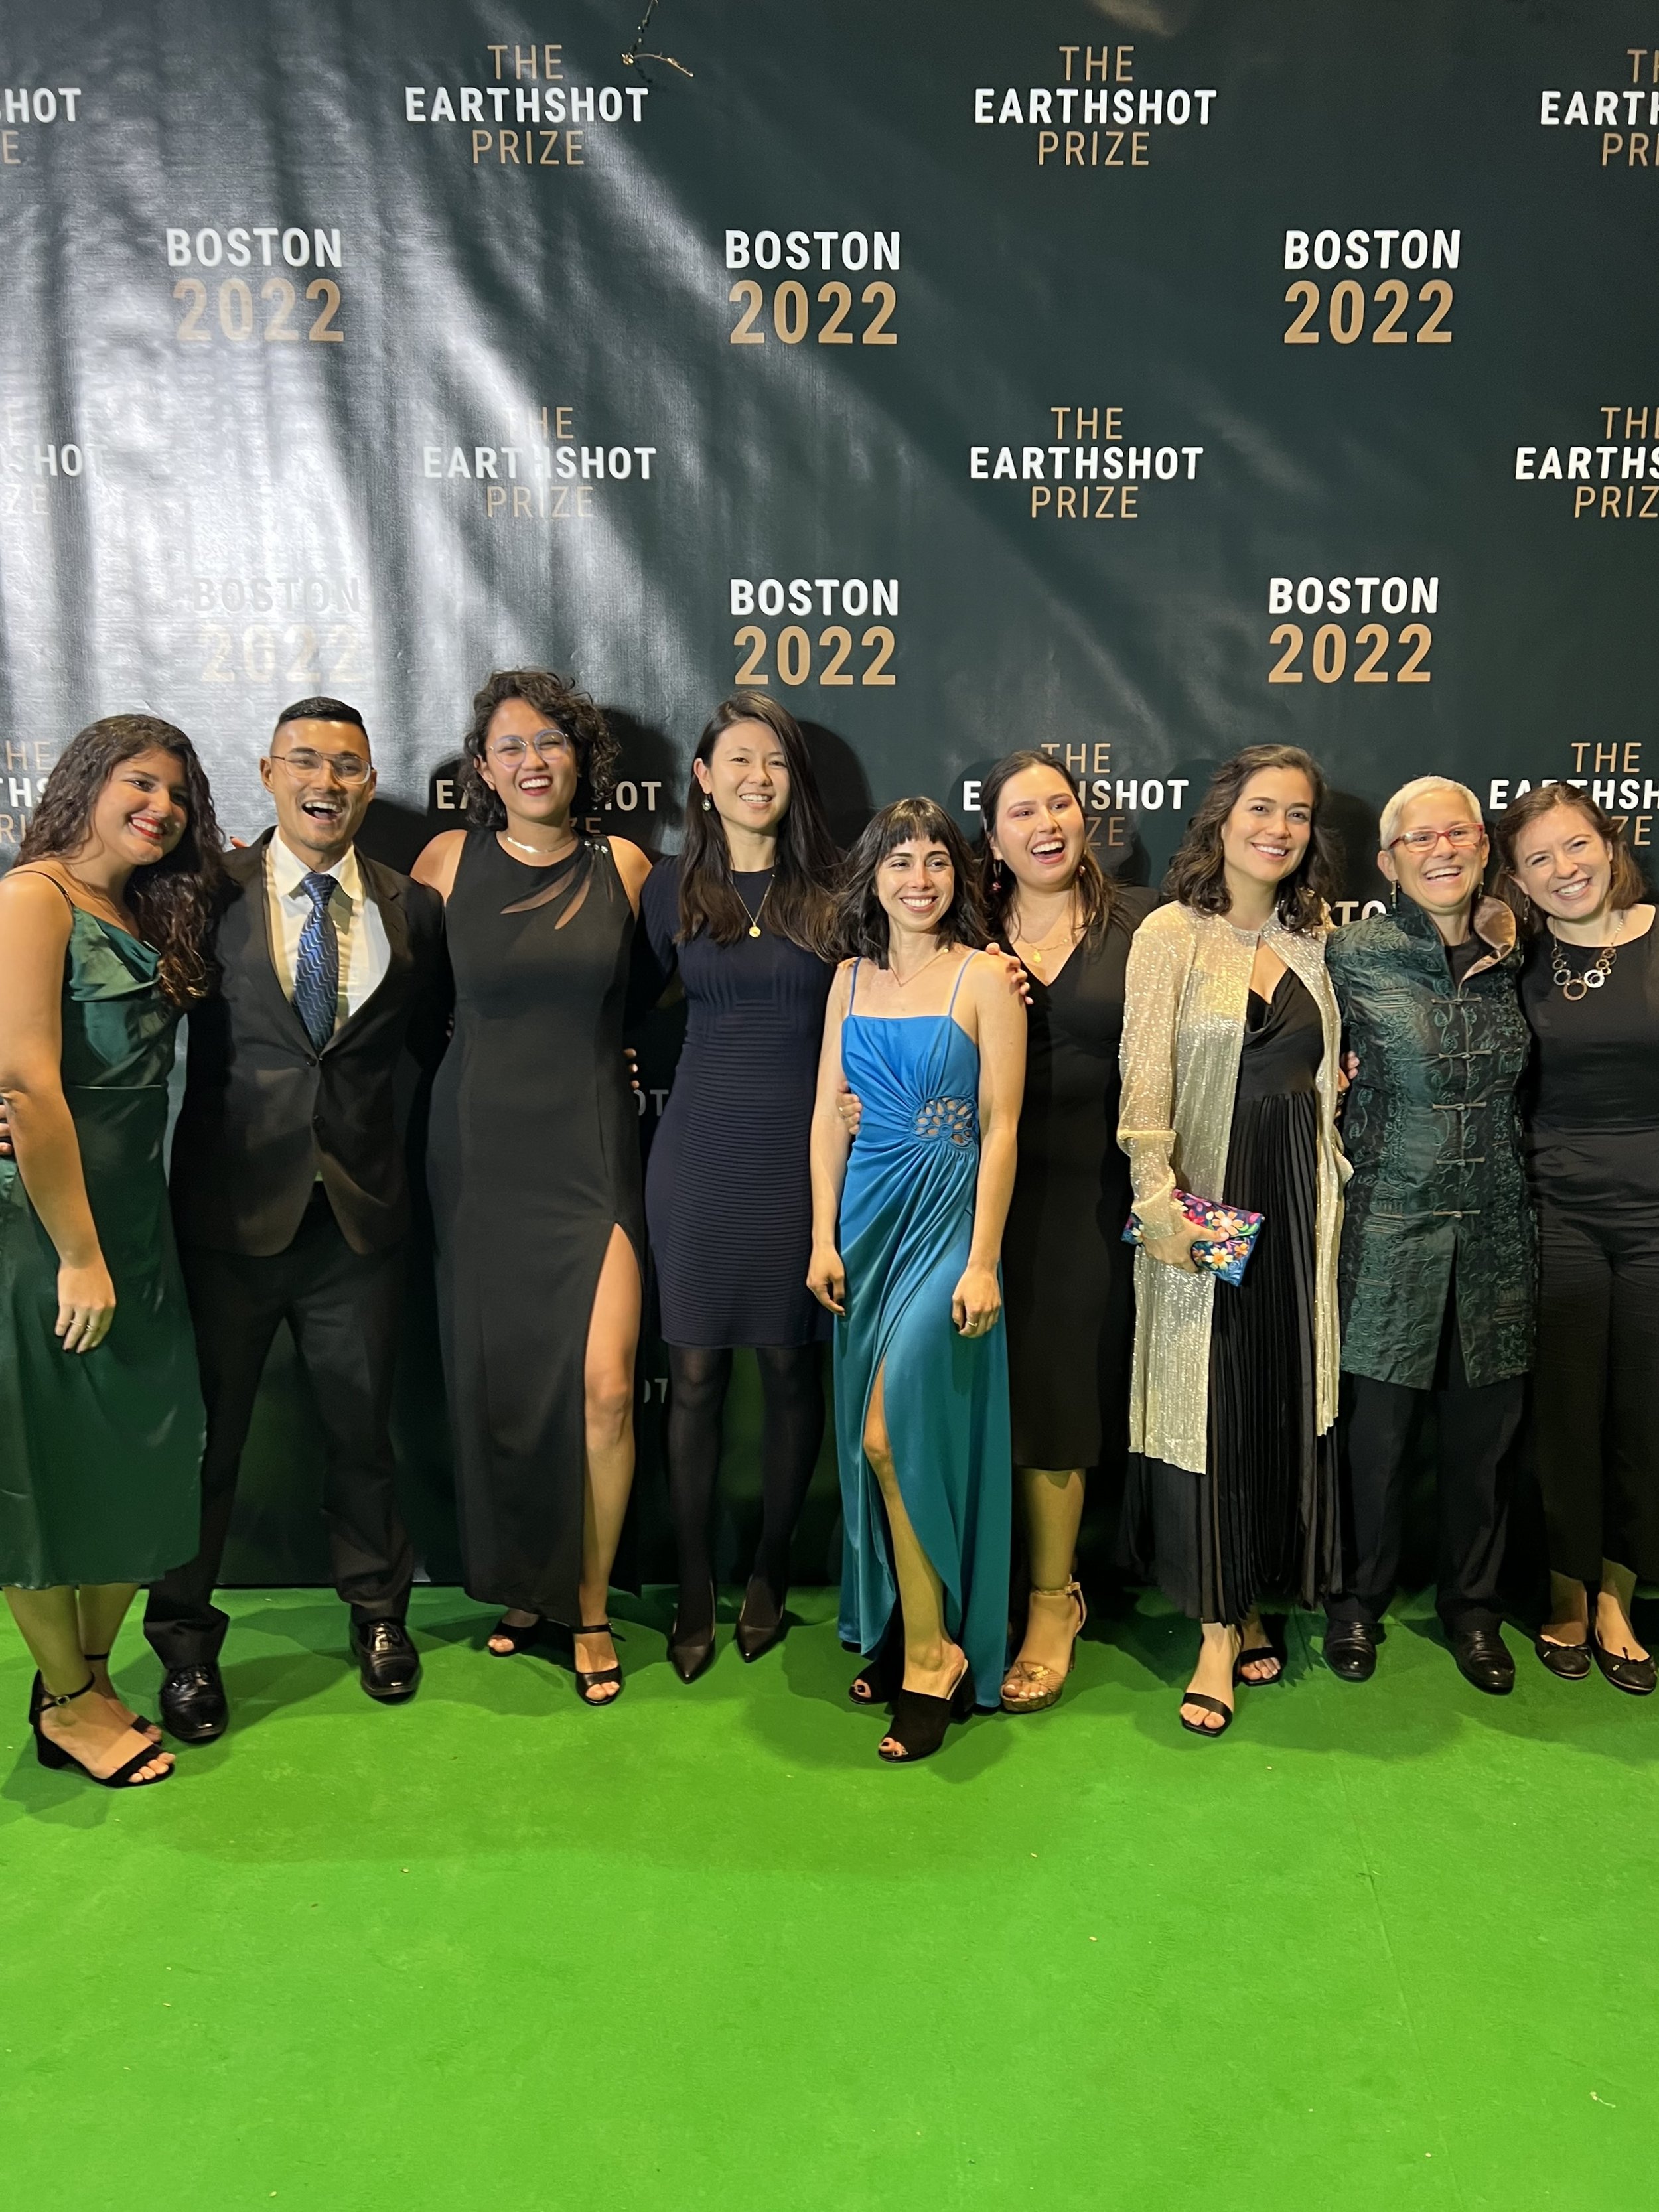  12.2.2022 | Members of the MyRWA team on the green carpet for the  2022 Earthshot Prize ceremony . MyRWA was honored to serve on the Host Committee for this event! Credit: Melanie Gárate 